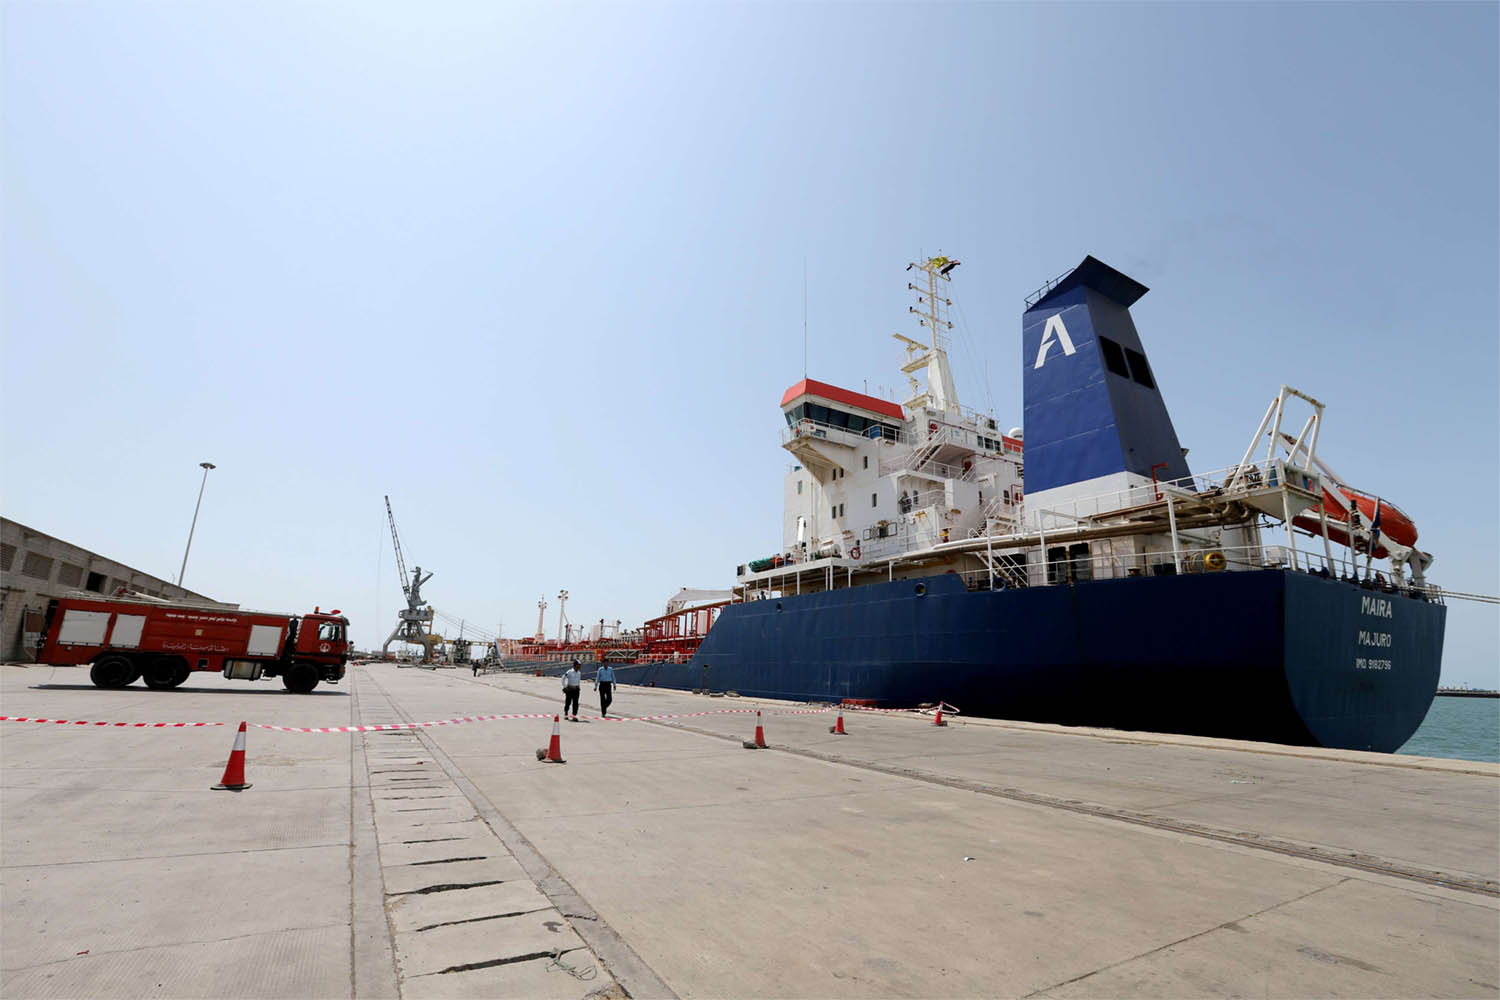 During the two-month truce, the Saudi-led coalition will allow 18 vessels carrying fuel into the port of Hodeidah